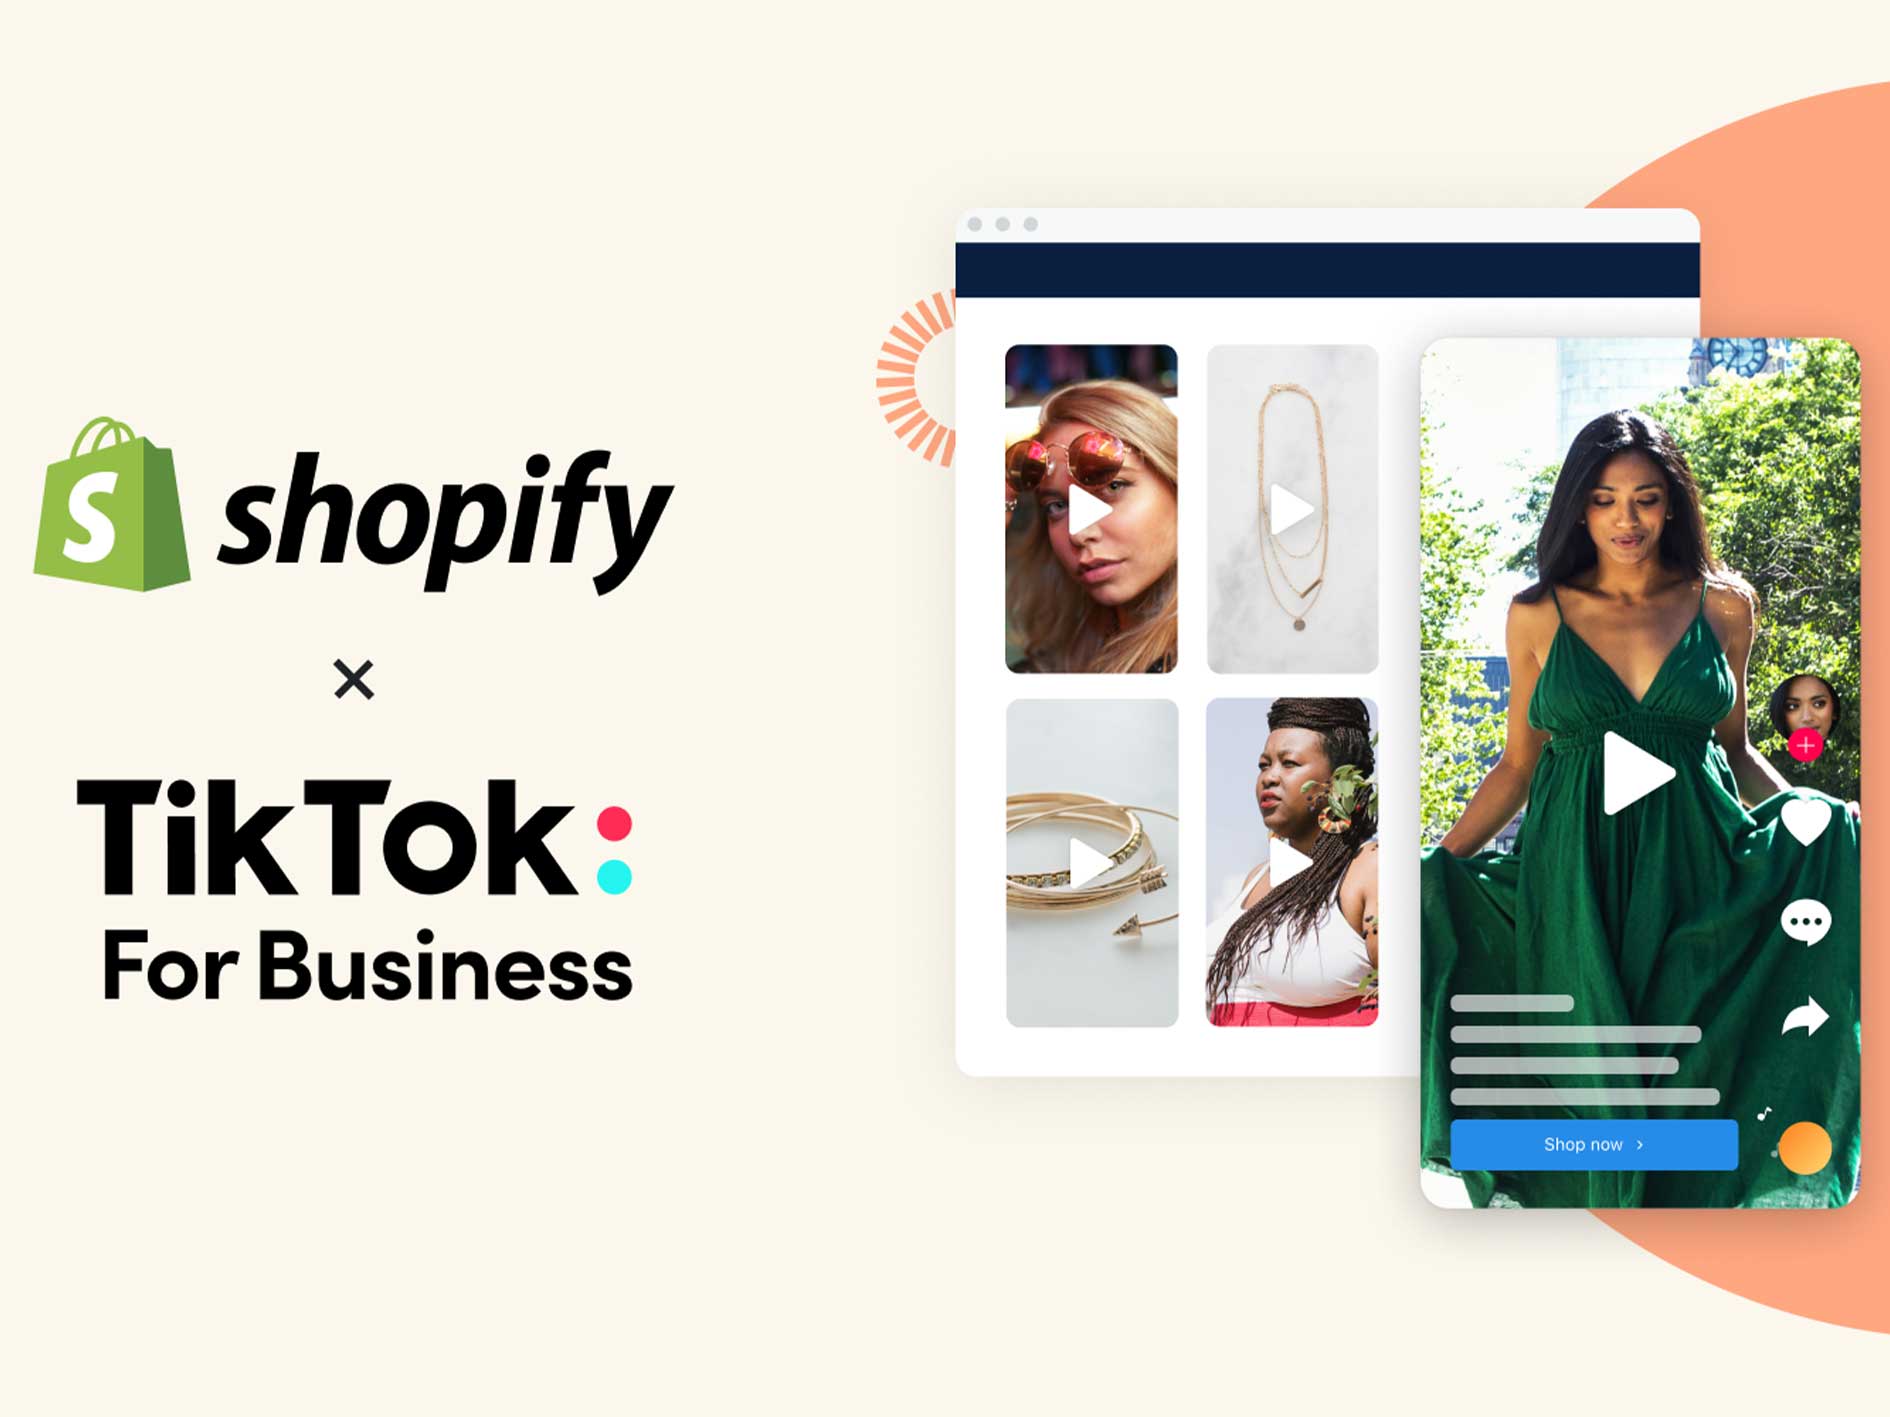 Converting Gen Z in one tap with TikTok shoppable ads